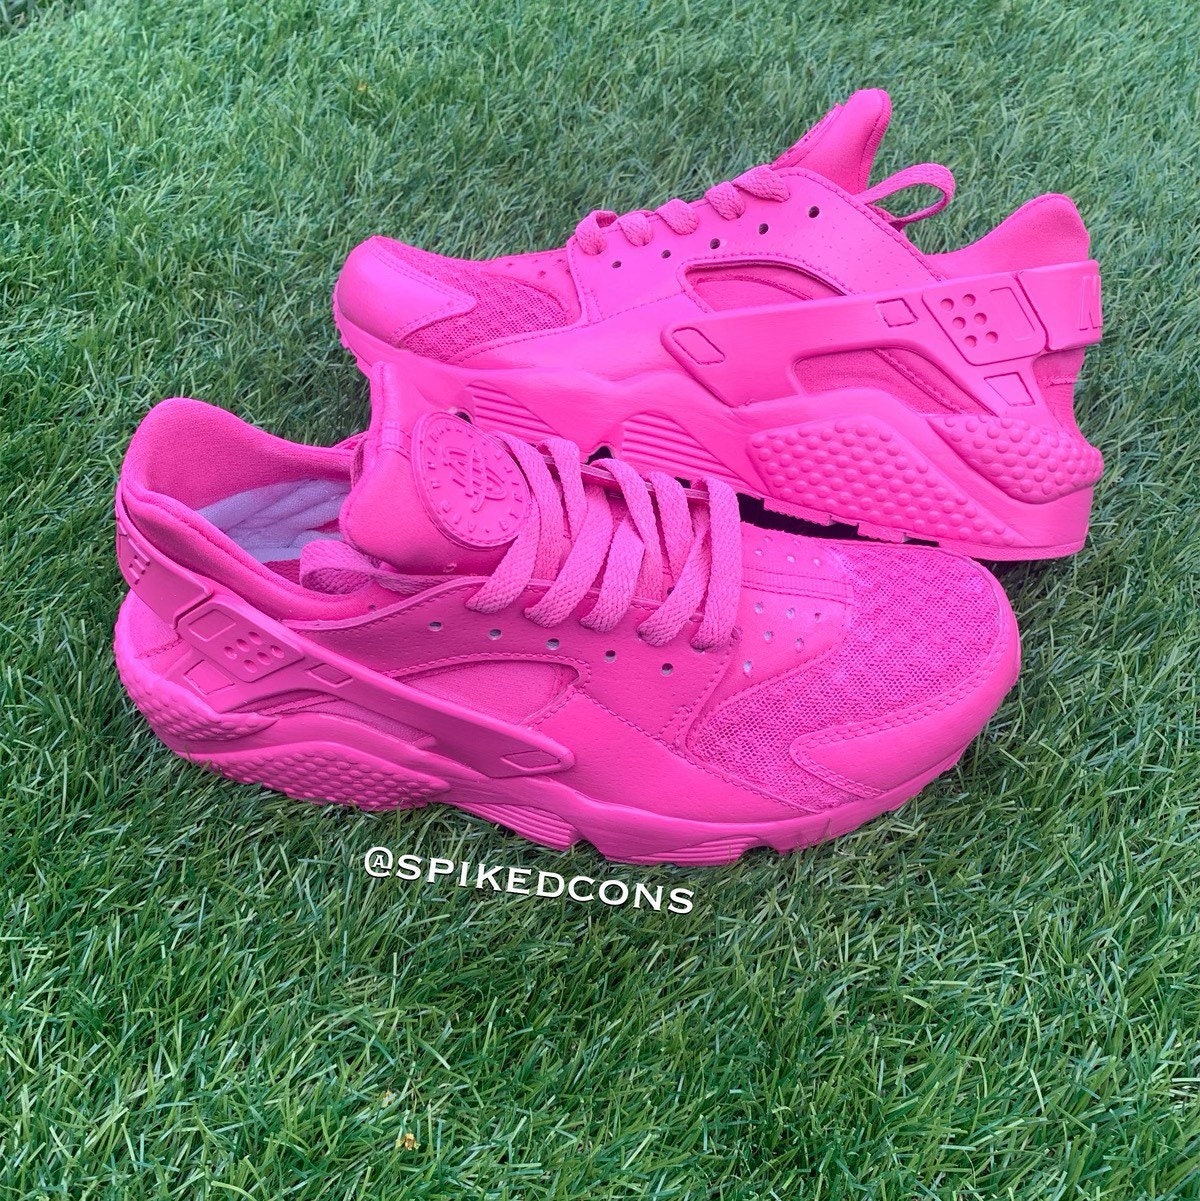 pink huaraches infant